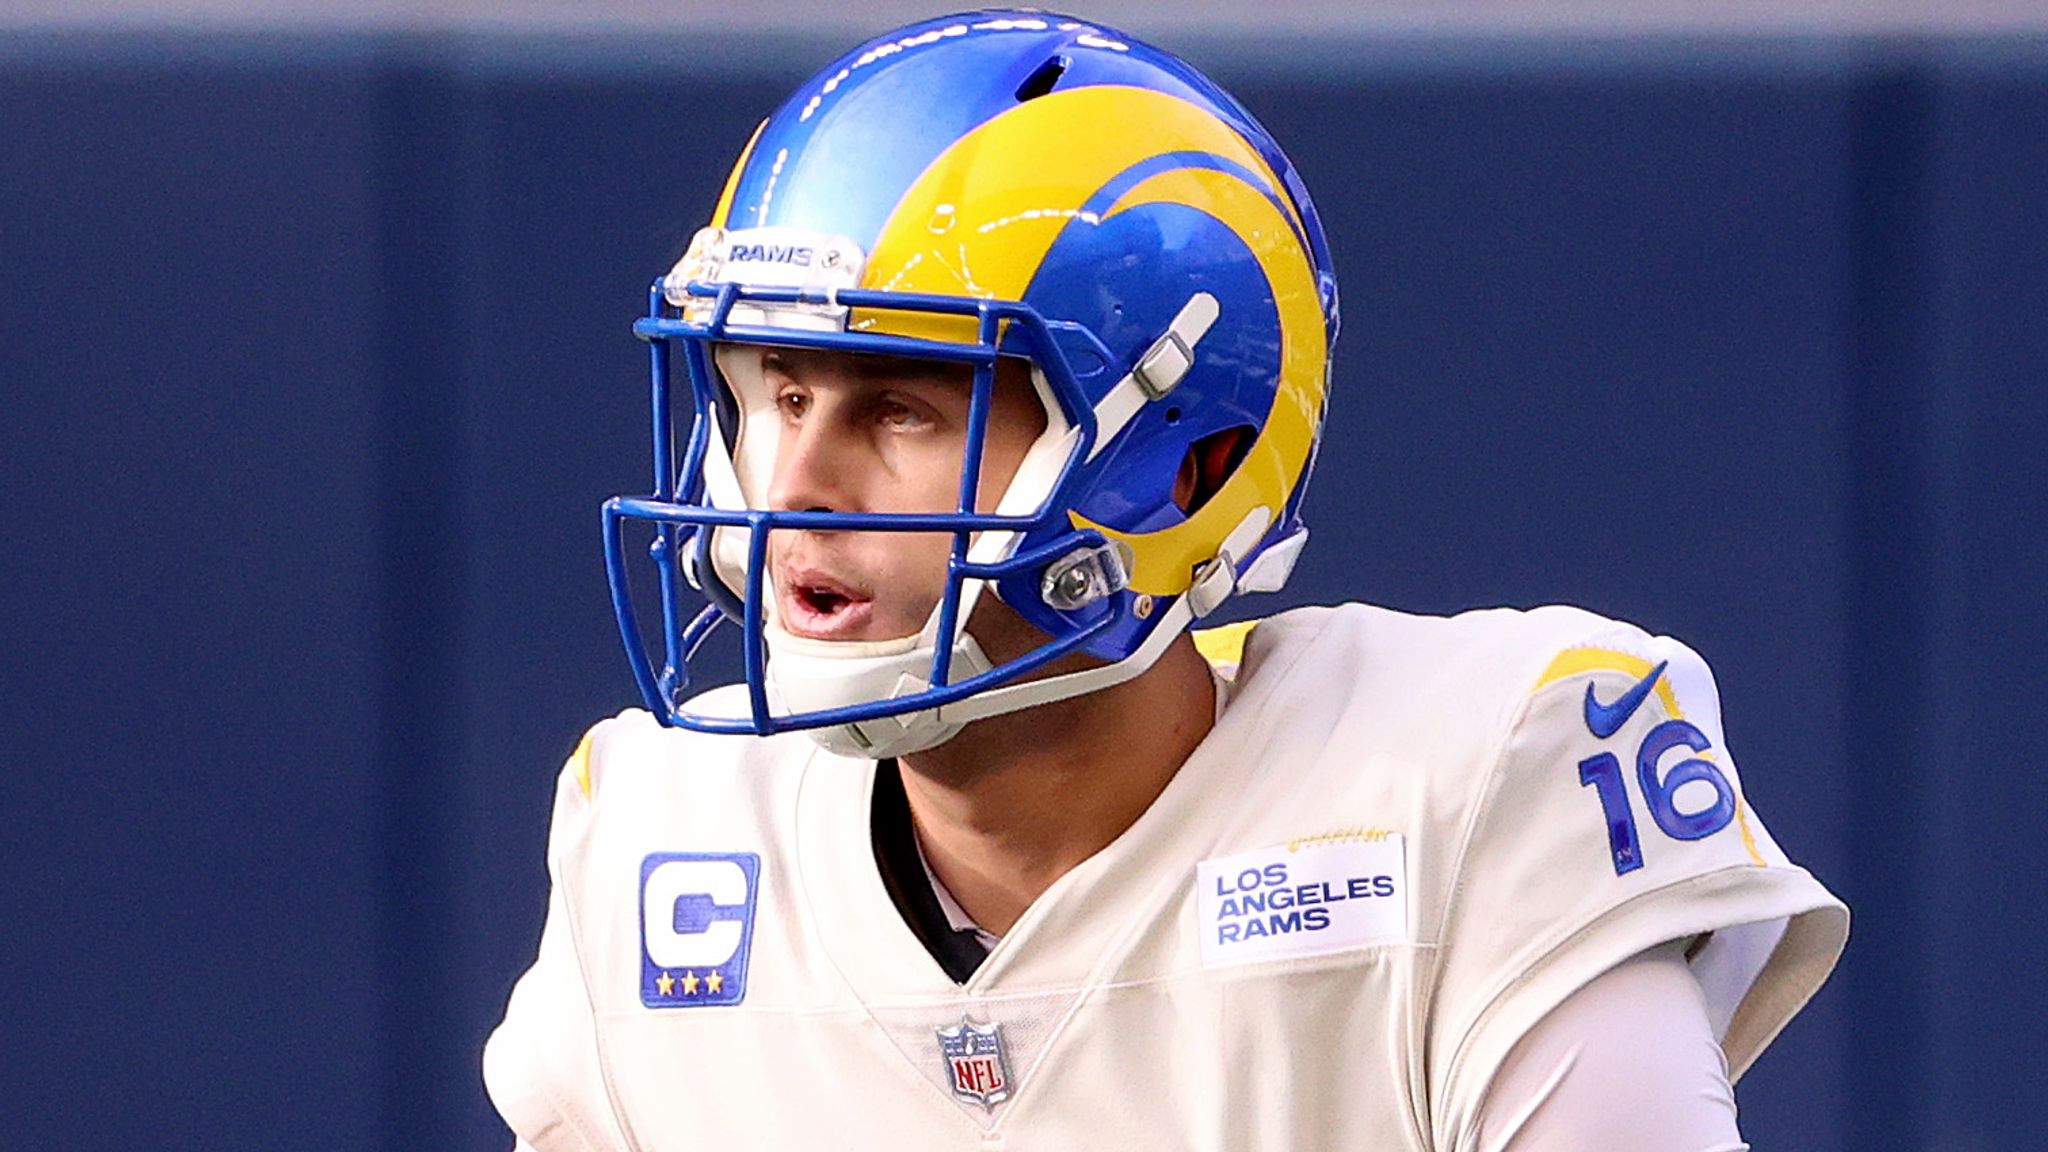 Los Angeles Rams - First look at Jared Goff in full uniform at the Coliseum  